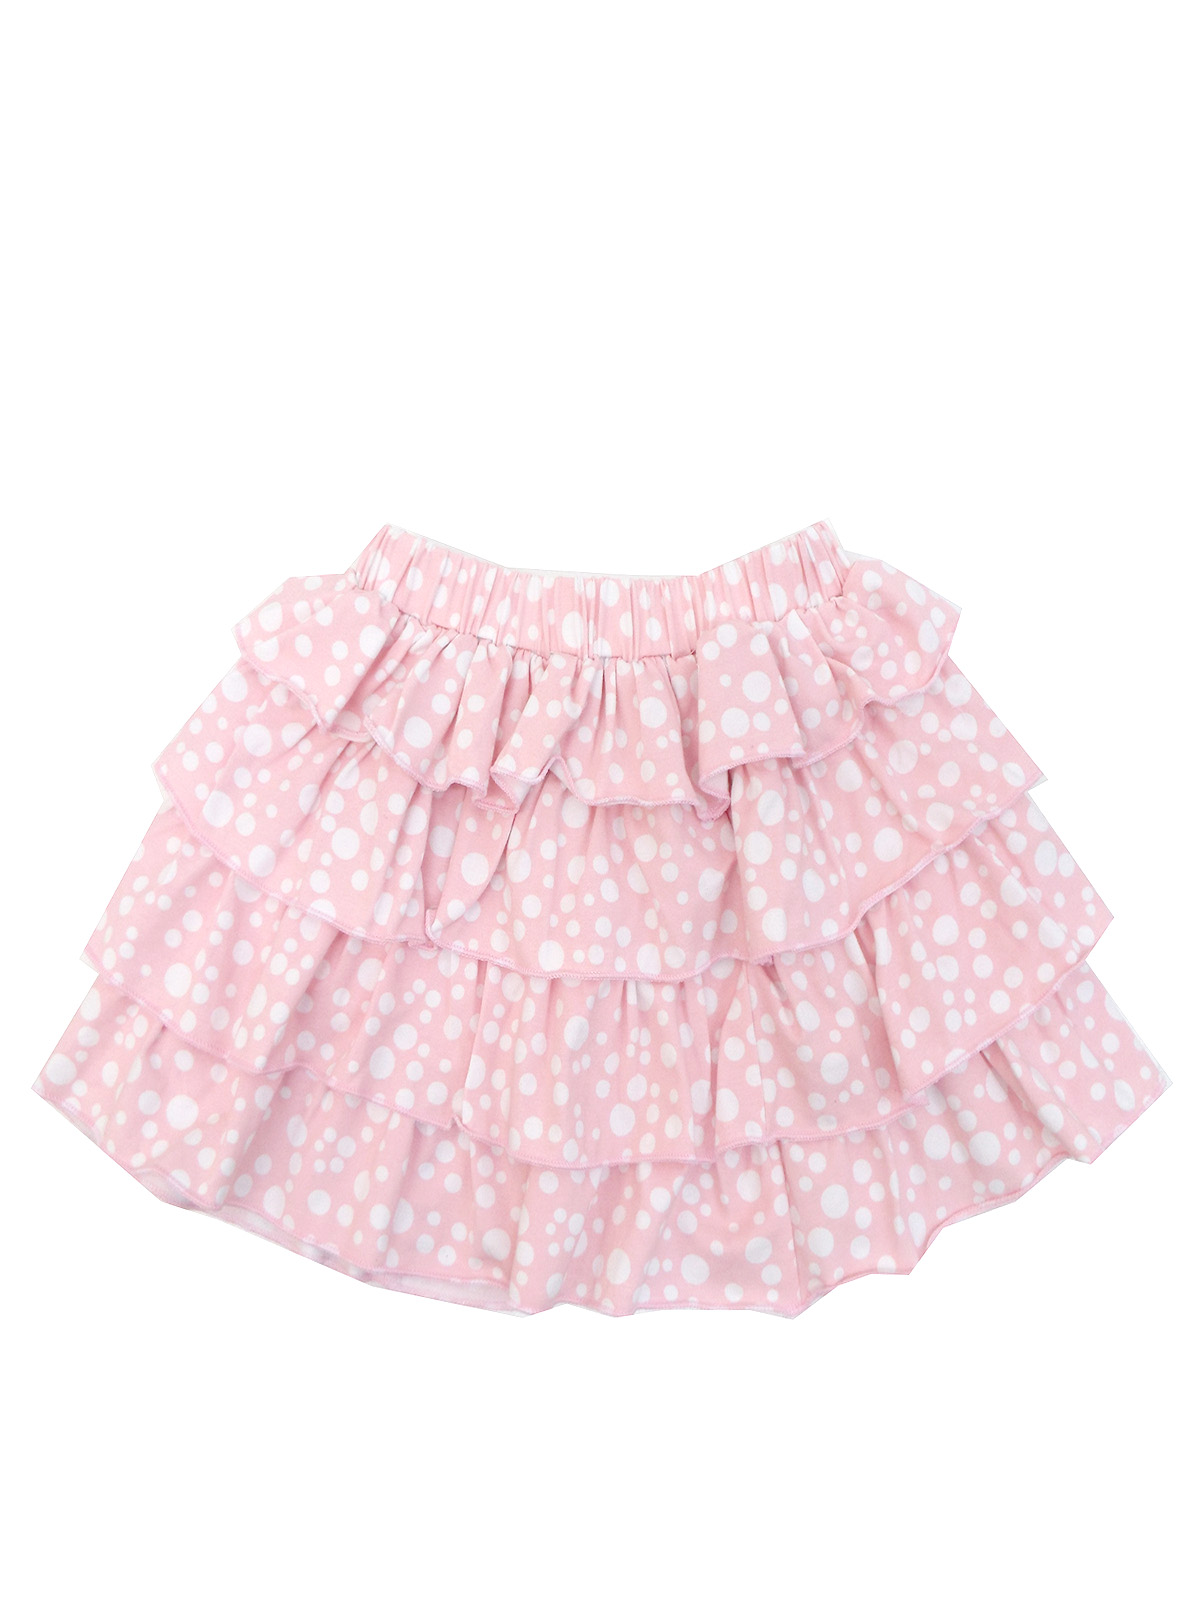 Le Chic - - Le Chic PINK-LOTUS Girls Cotton Rich Spotted Rara Skirt ...